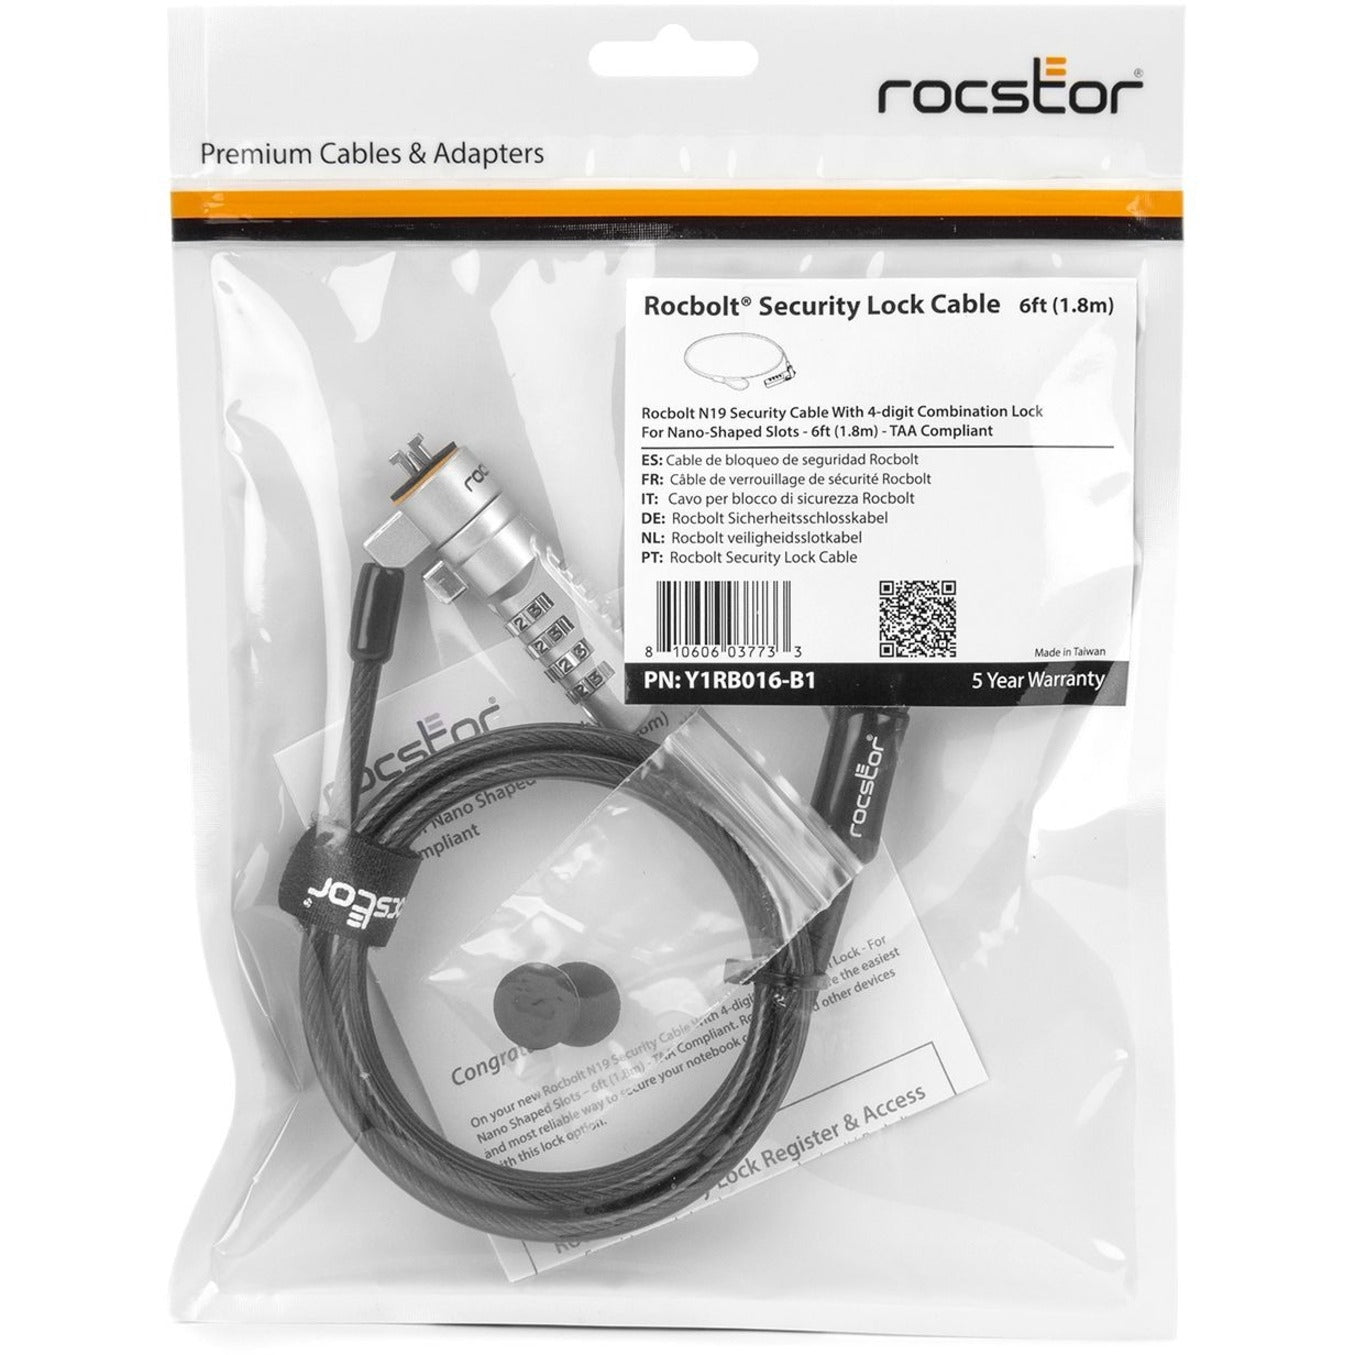 Rocstor Y1RB016-B1 Rocbolt N19 Security Cable, 6ft 4-Digit Combination Lock, TAA Compliant